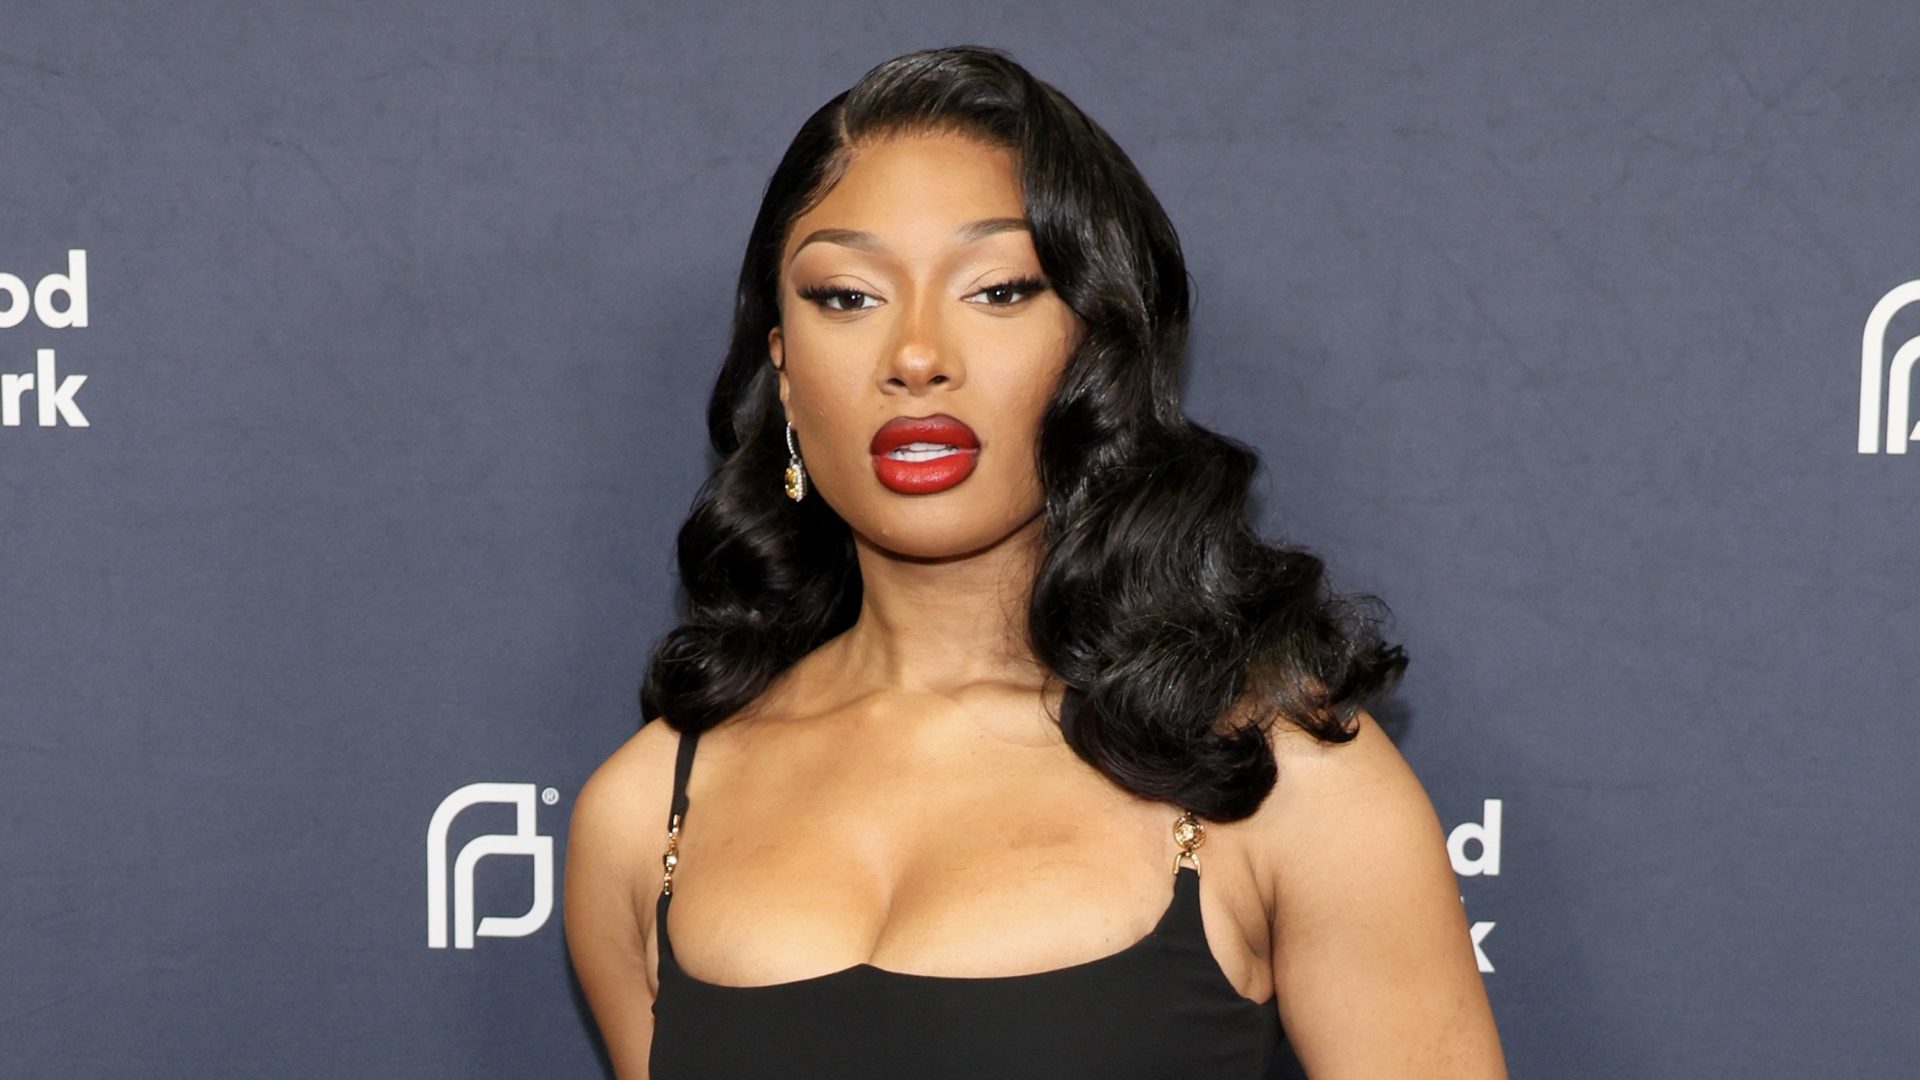 Megan Thee Stallion Accused Of Harassment By Former Photographer Who Alleges He Was Forced To Watch Her Being Intimate